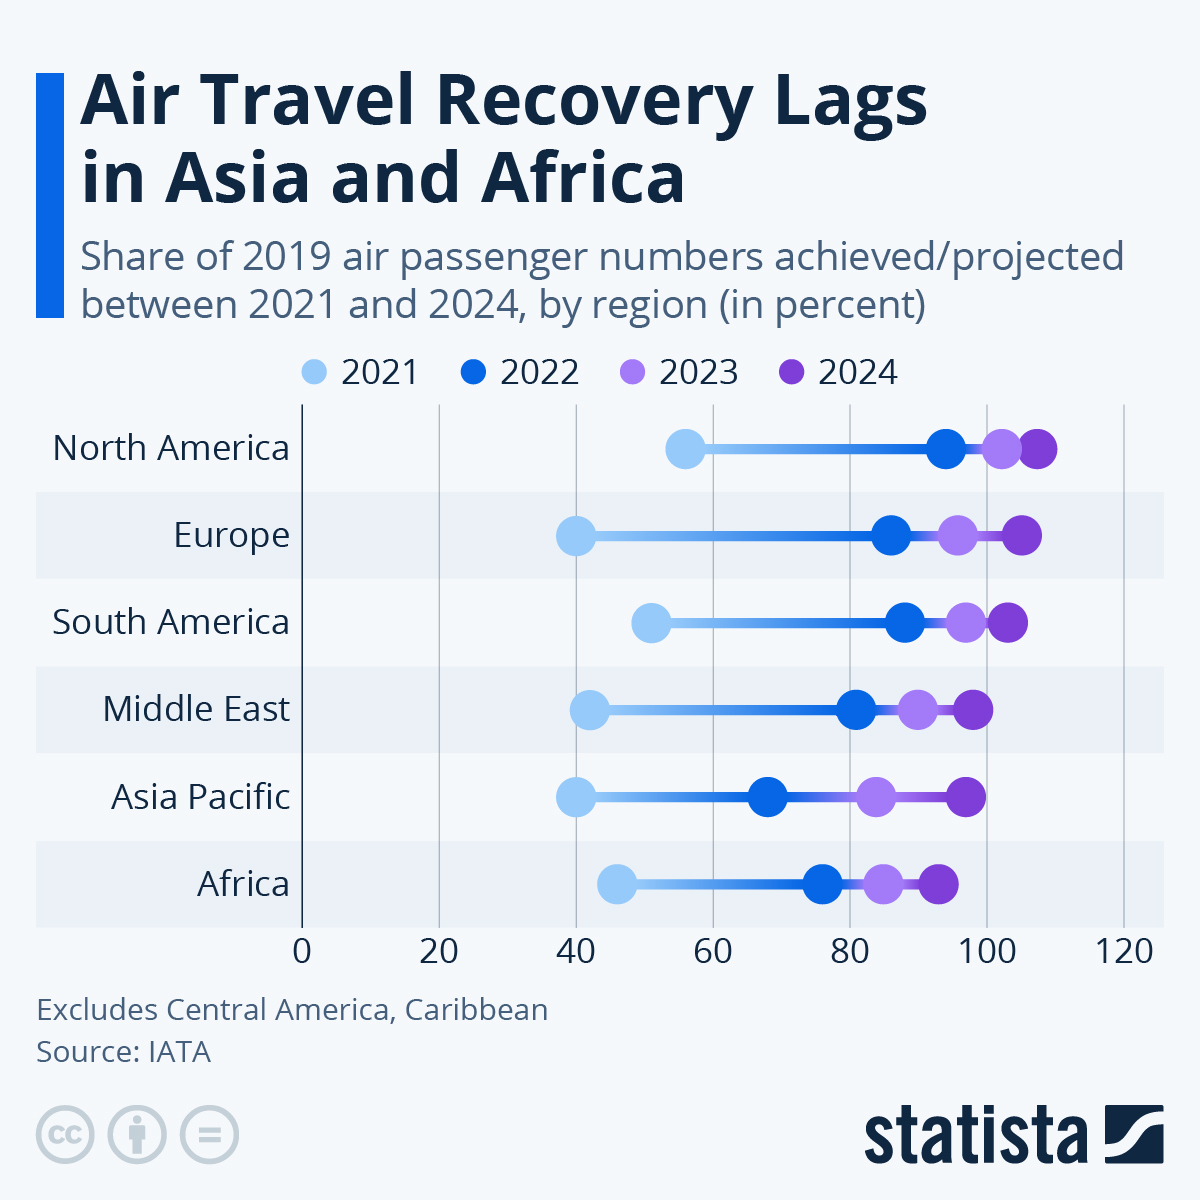 Air Travel Recovery Lags in Asia and Africa